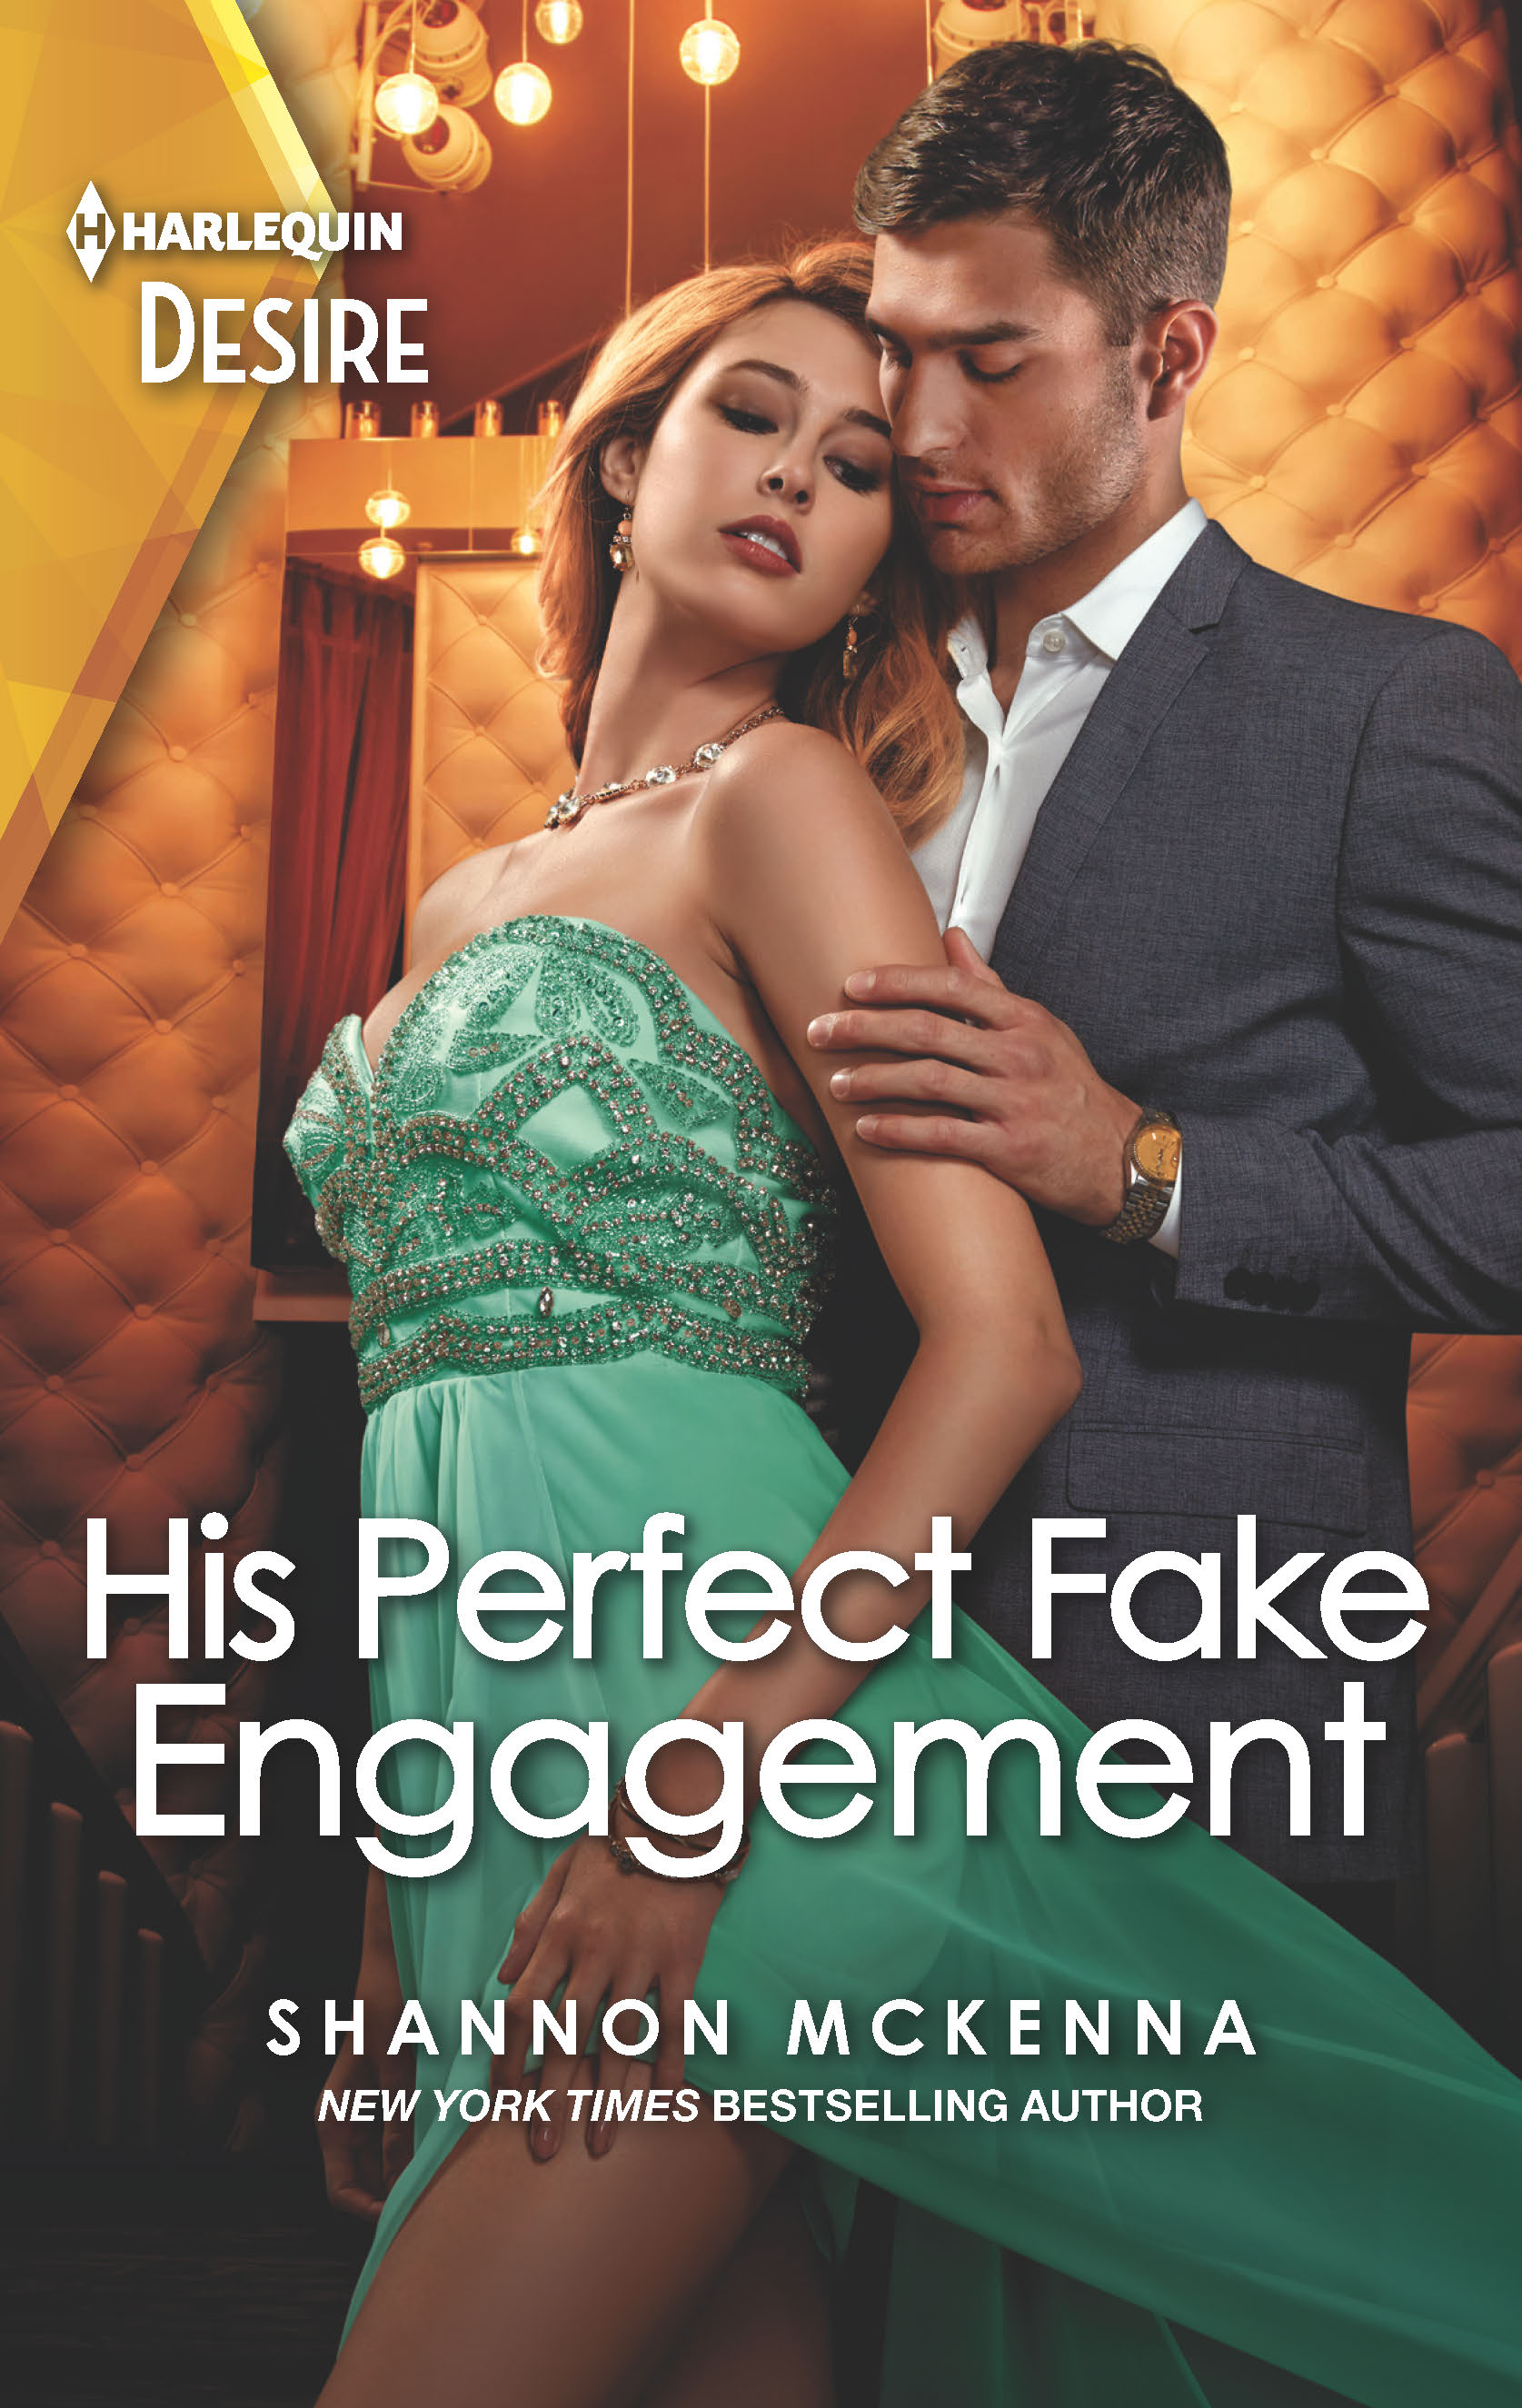 His Perfect Fake Engagement - Shannon McKenna | New York Times ...